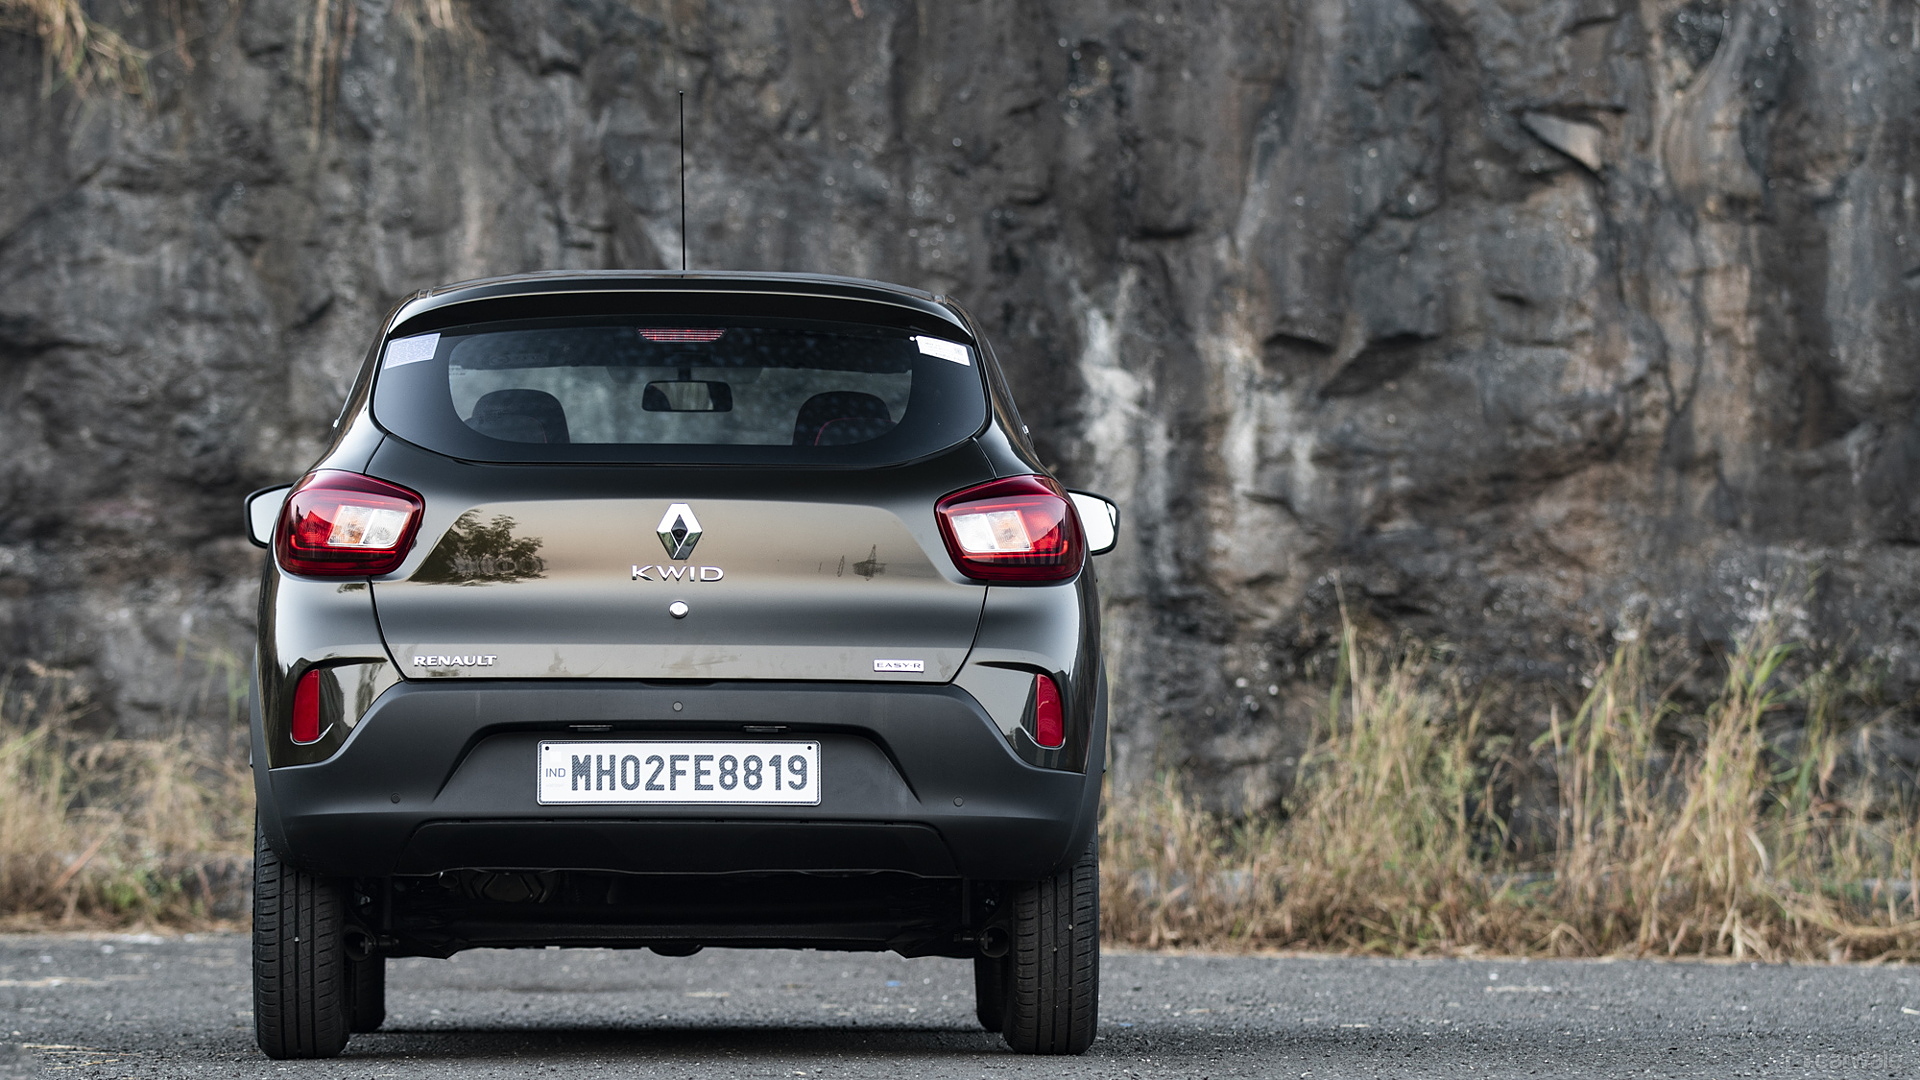 Renault Kwid Colours In India 6 Kwid Colour Images Carwale